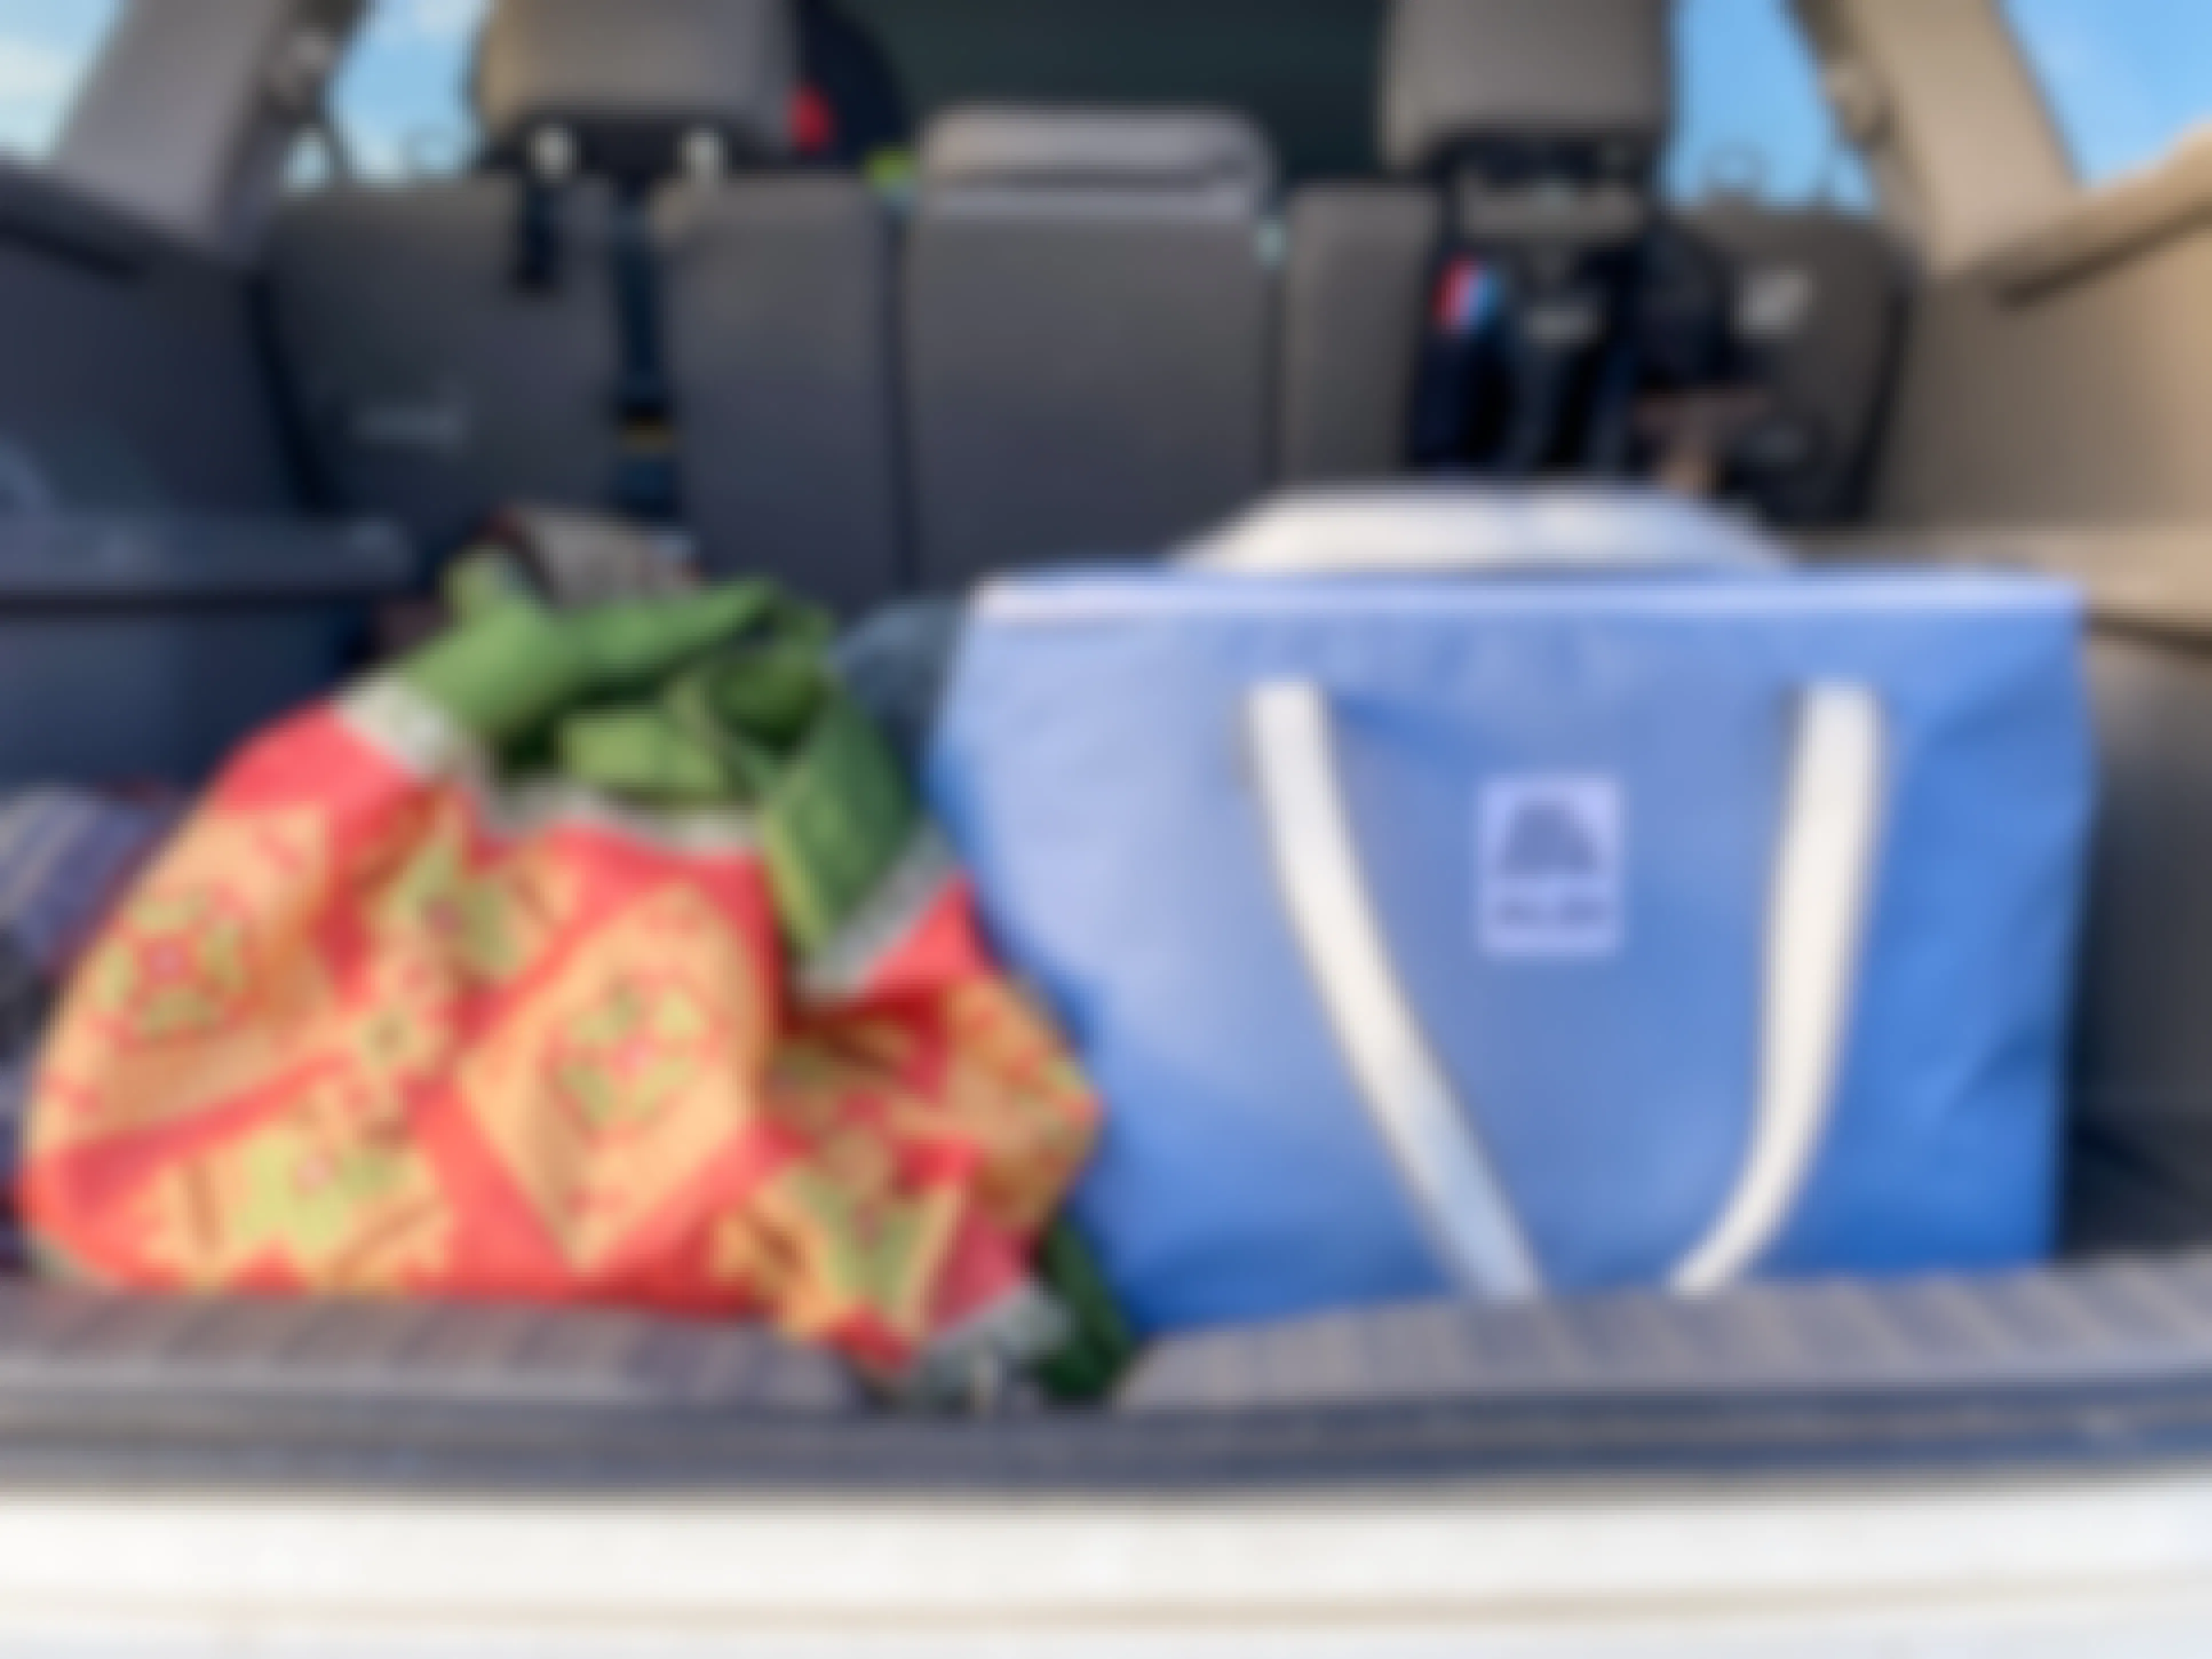 Some reusable shopping bags in the trunk of a vehicle.